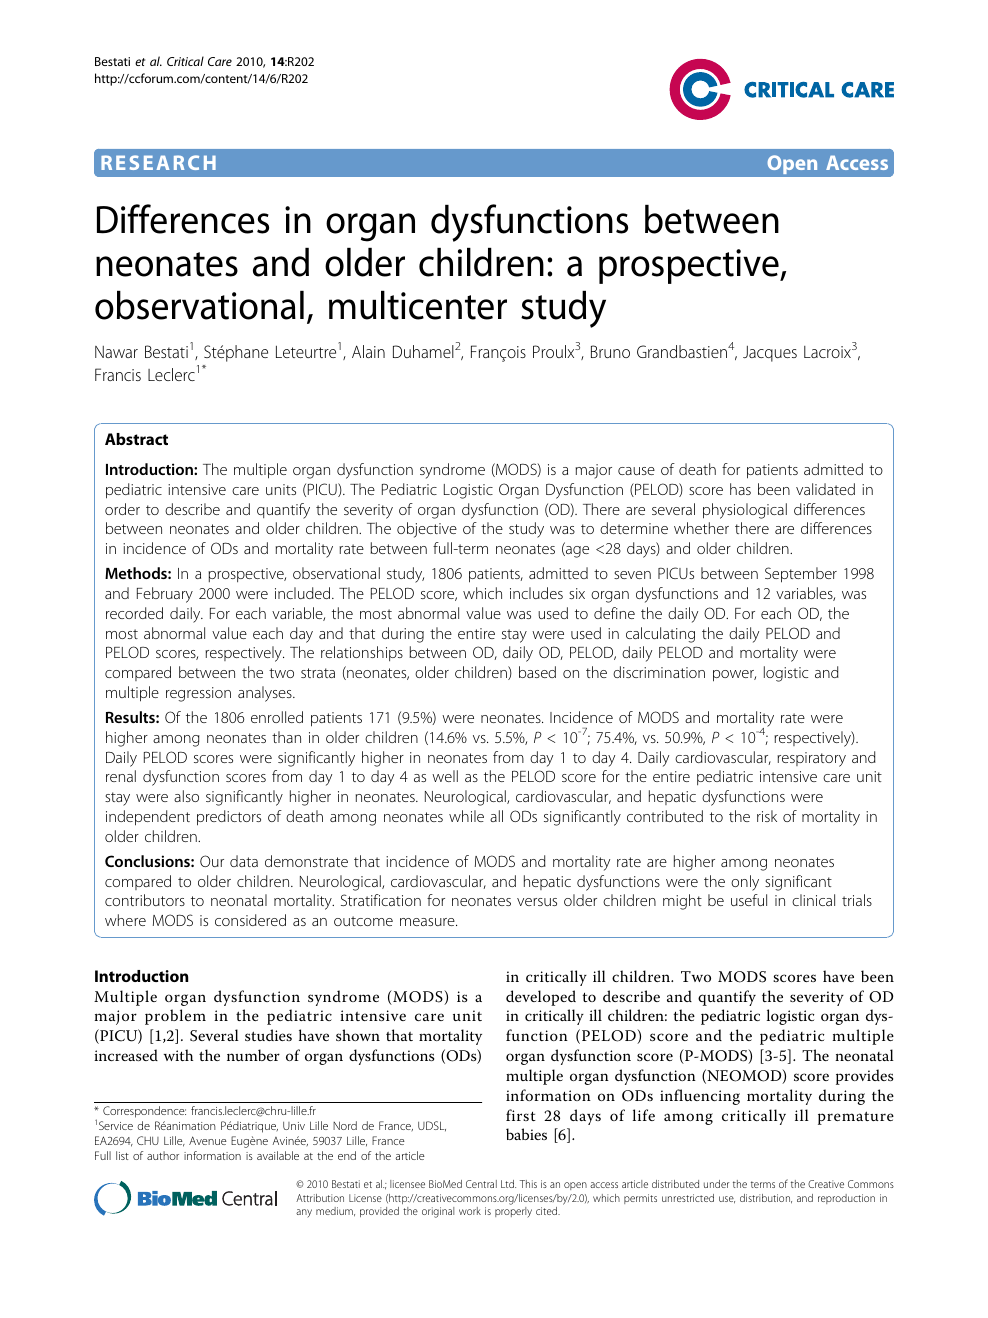 Numero Leclerc Élégant Differences In organ Dysfunctions Between Neonates and Older